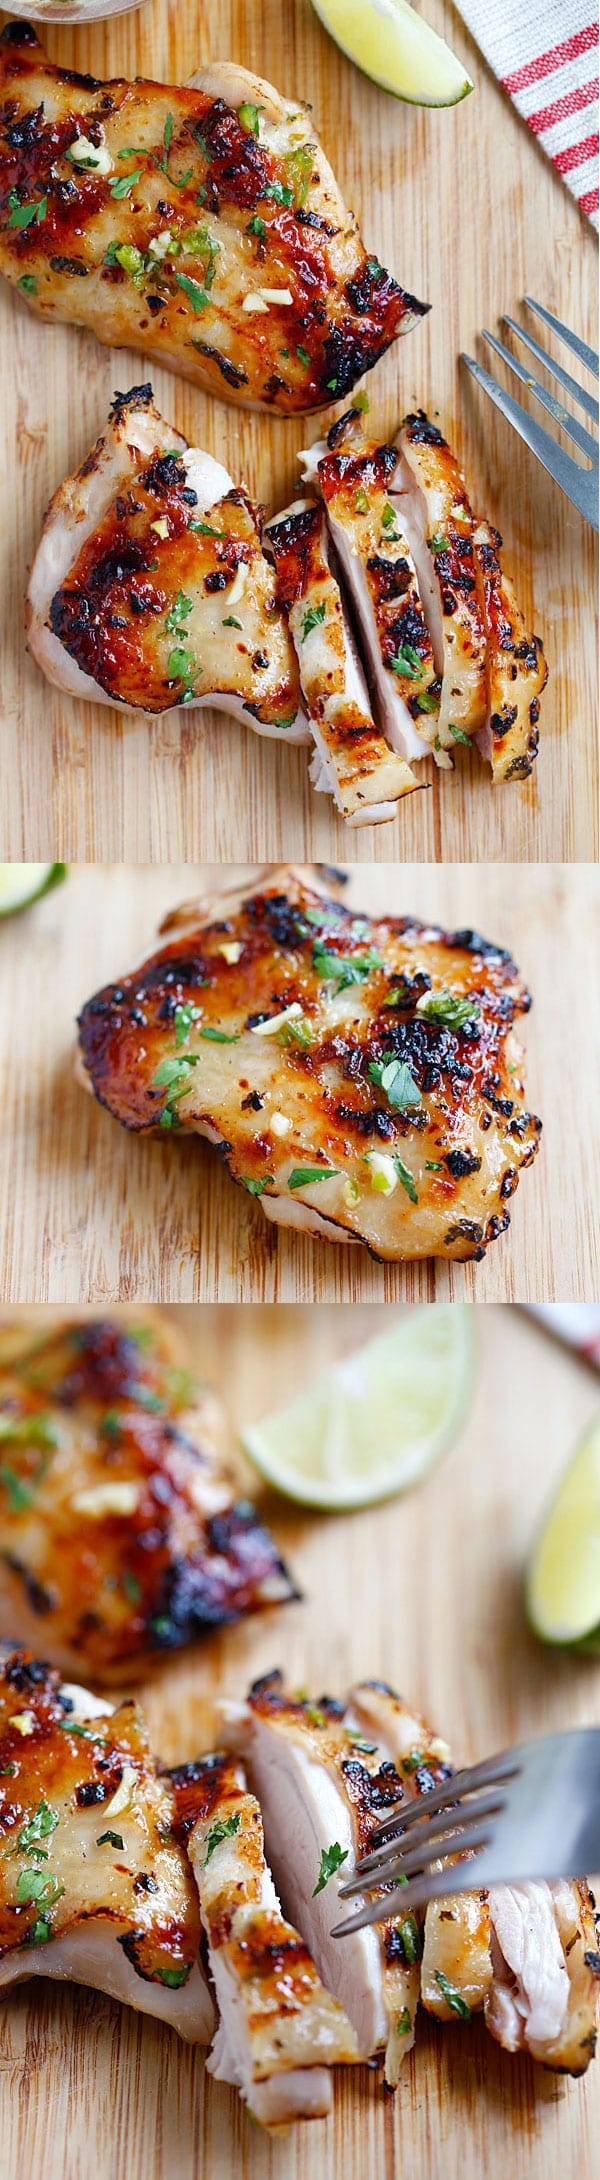 Chili lime chicken - moist and delicious chicken marinated with chili and lime and grill to perfection. Easy recipe that takes 30 mins! | rasamalaysia.com